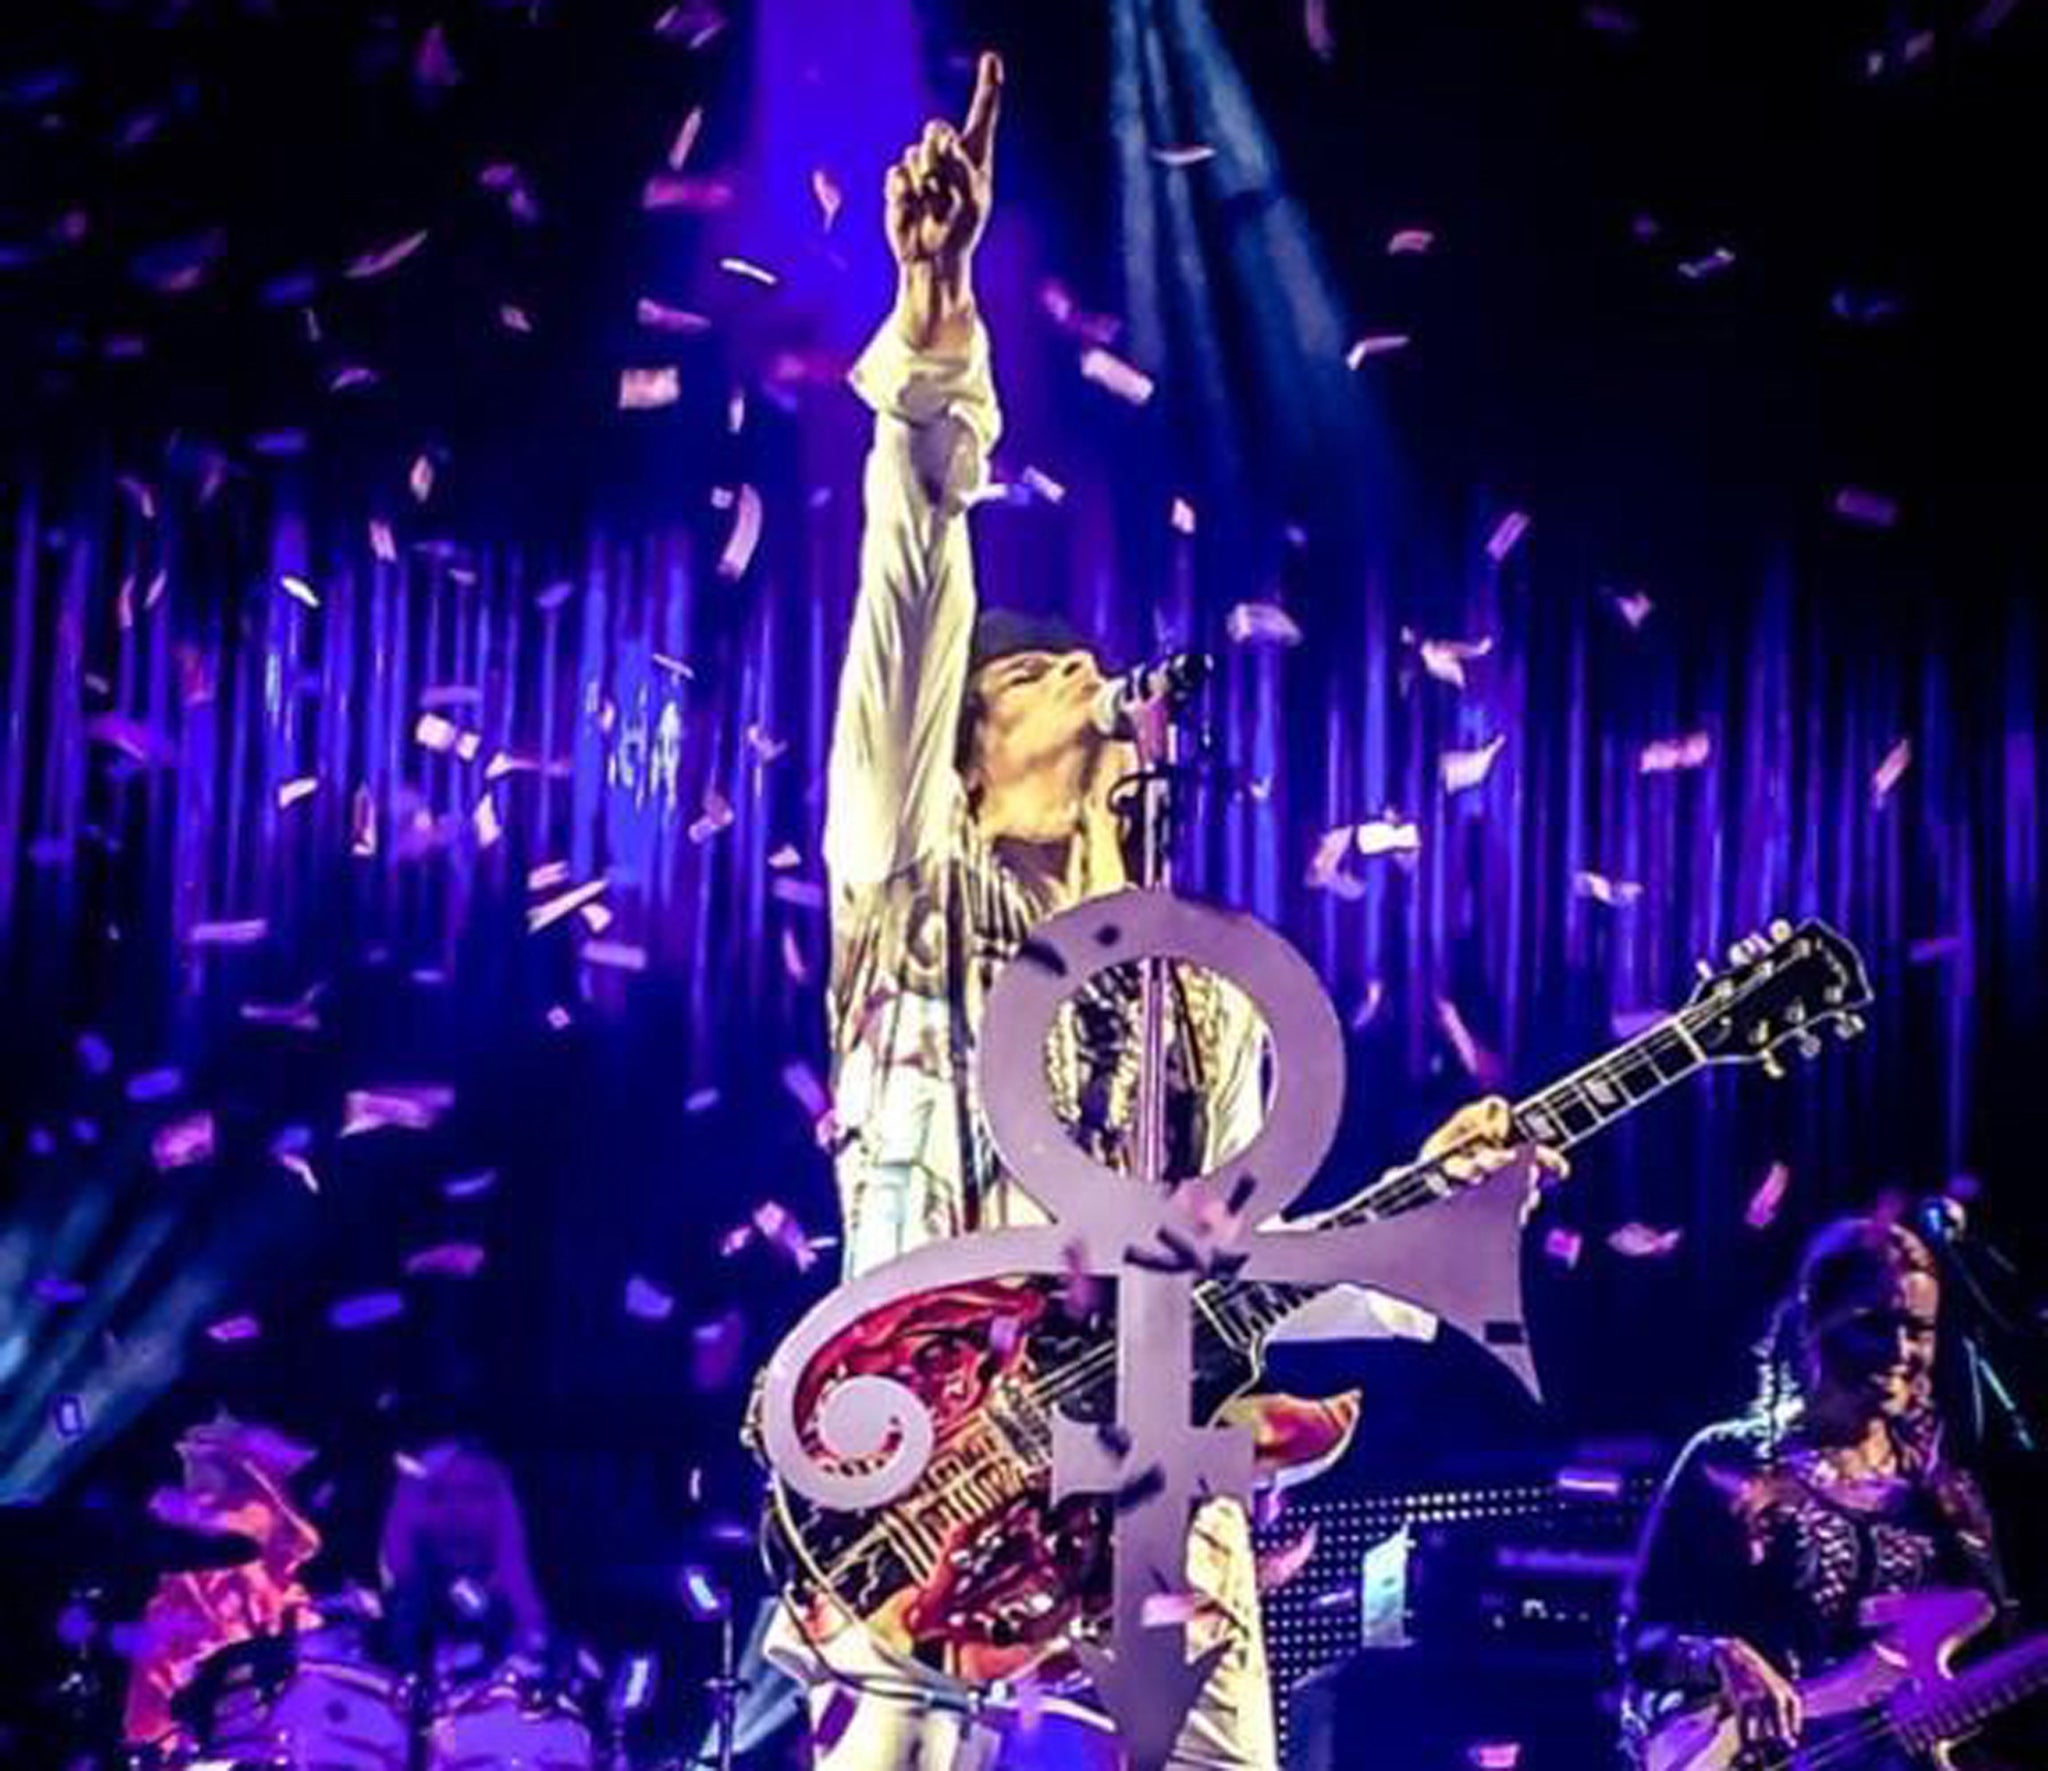 Prince performs on stage in Birmingham as part of his UK tour